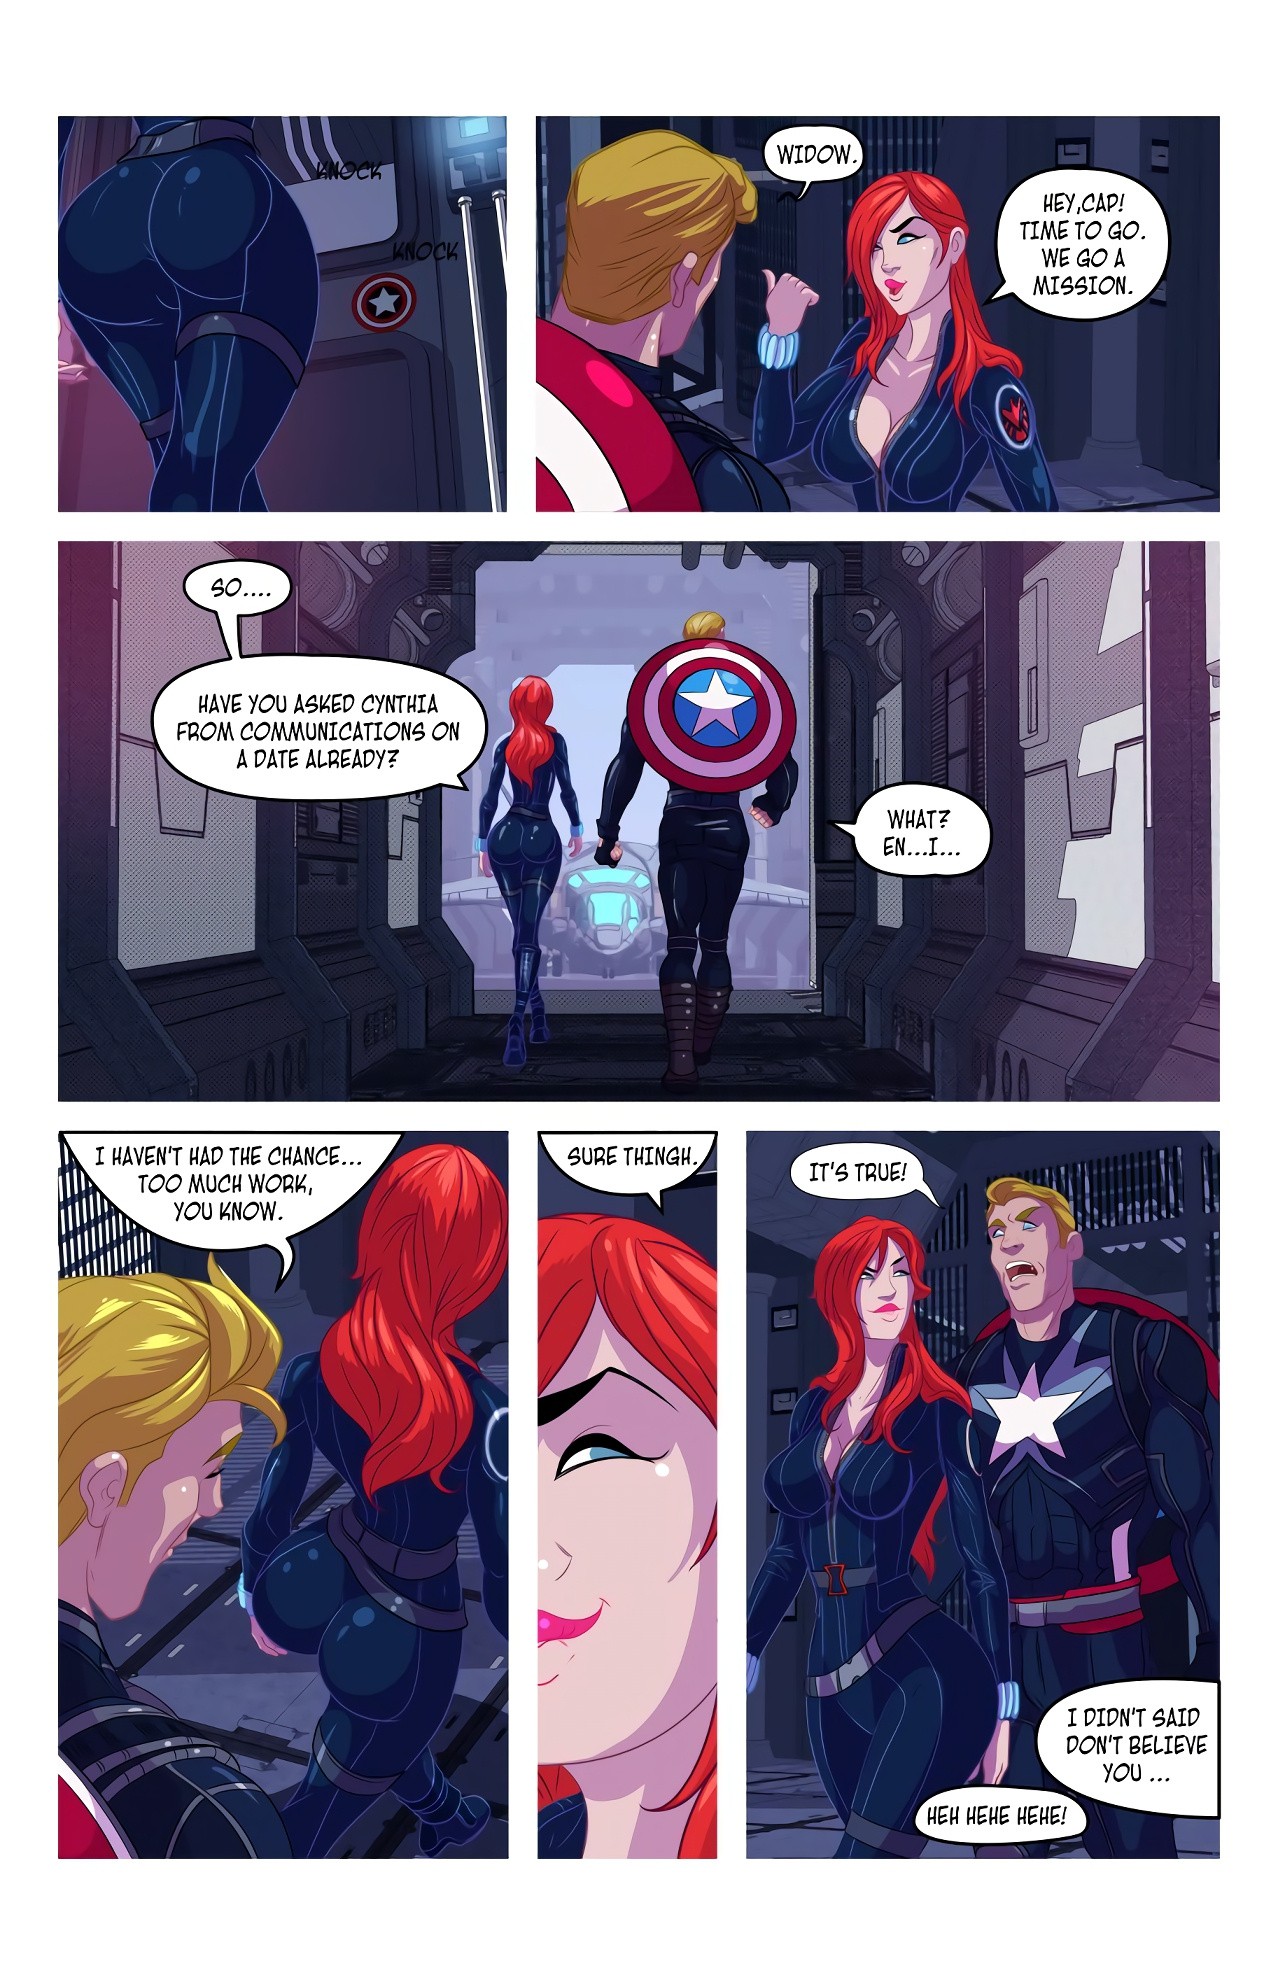 Widow’s Downtime porn comic picture 4